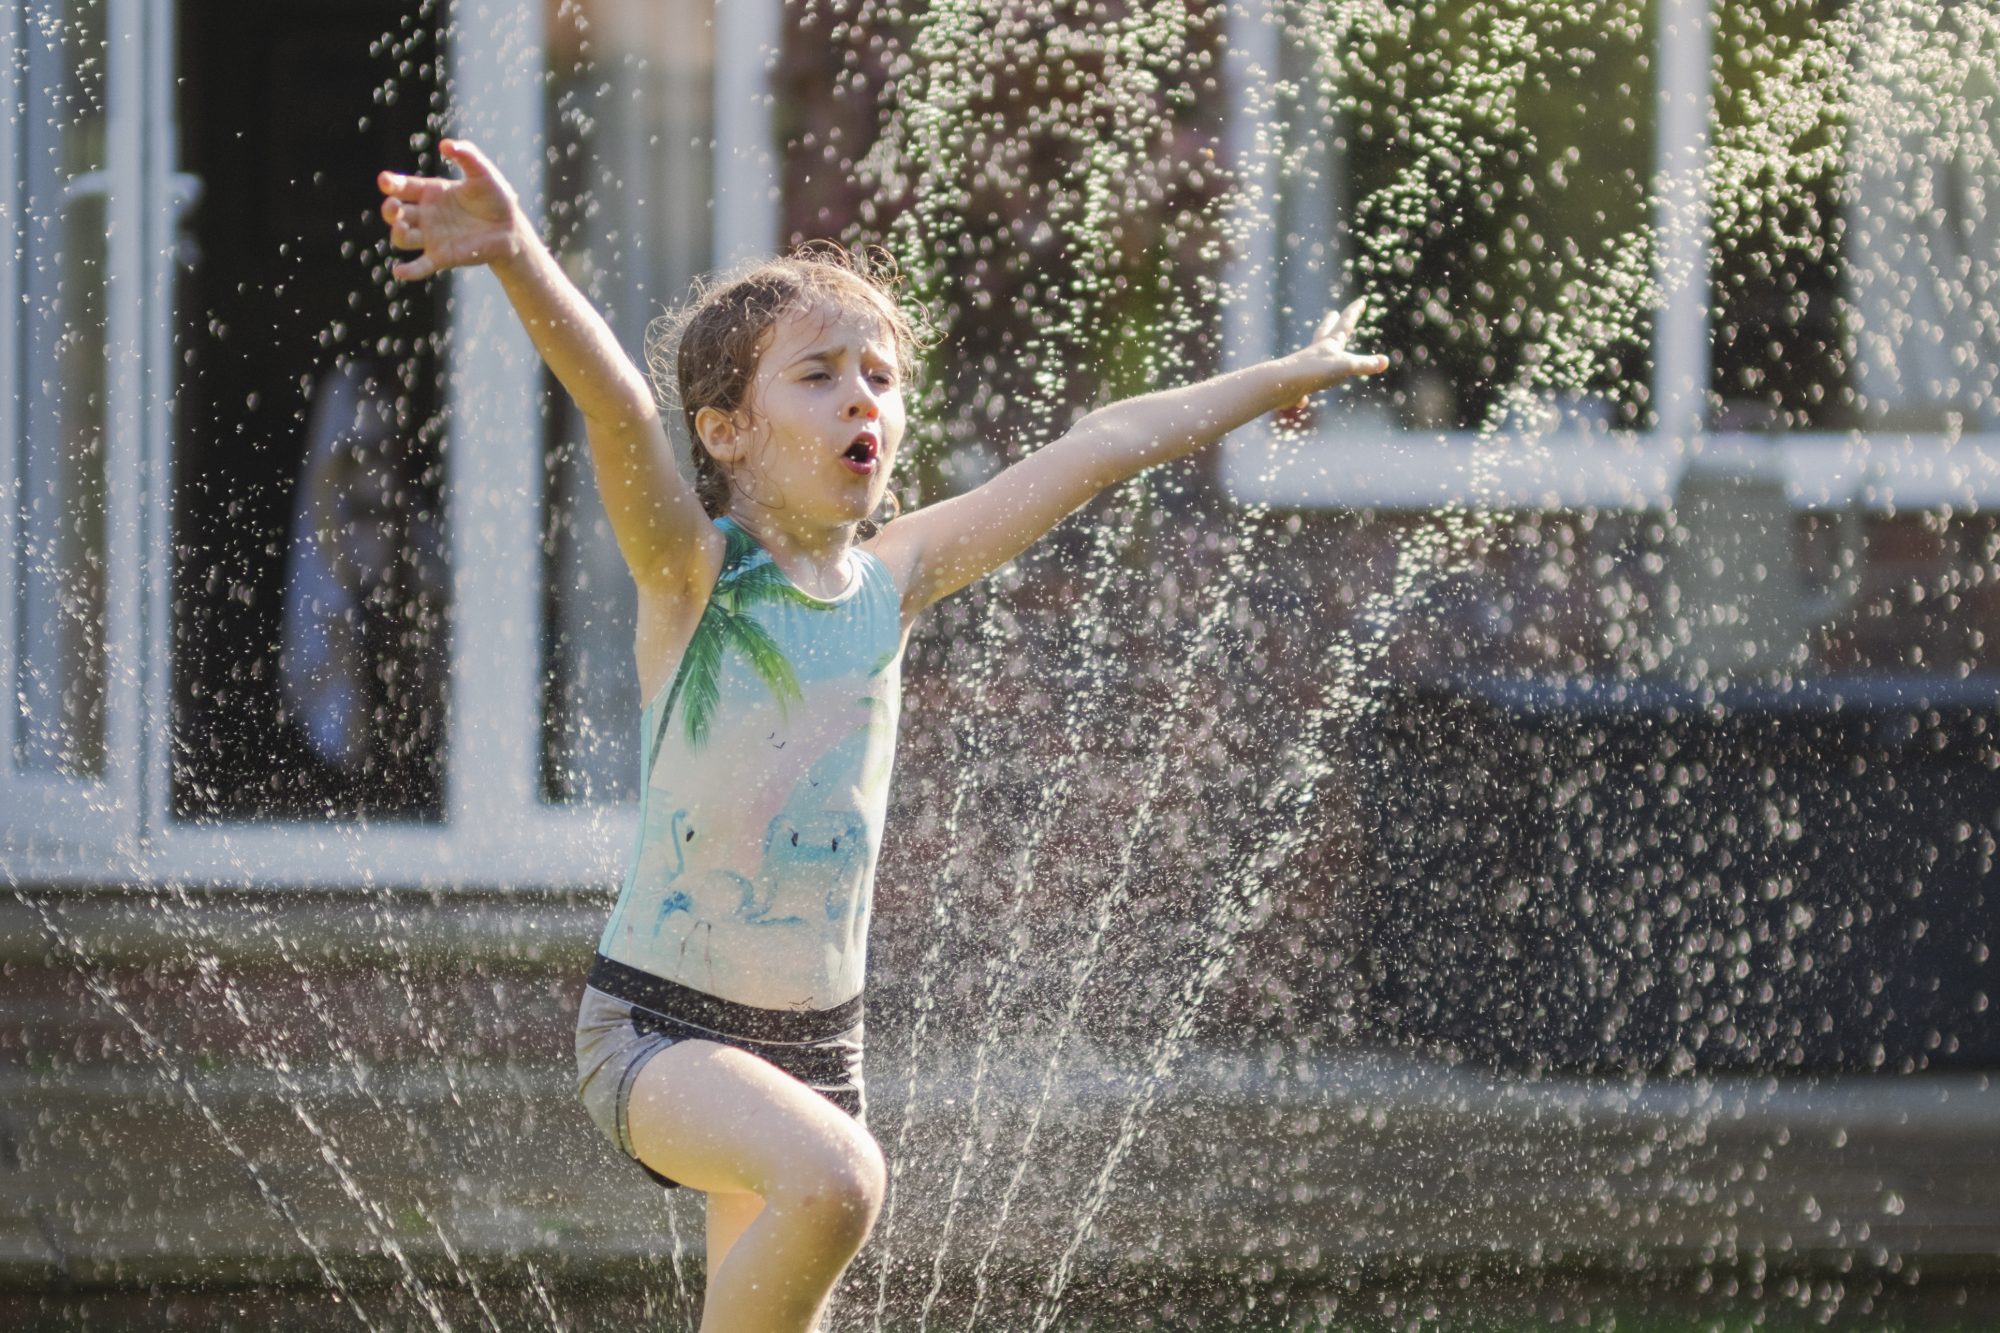 A happy girl is jumping through a sprinkler